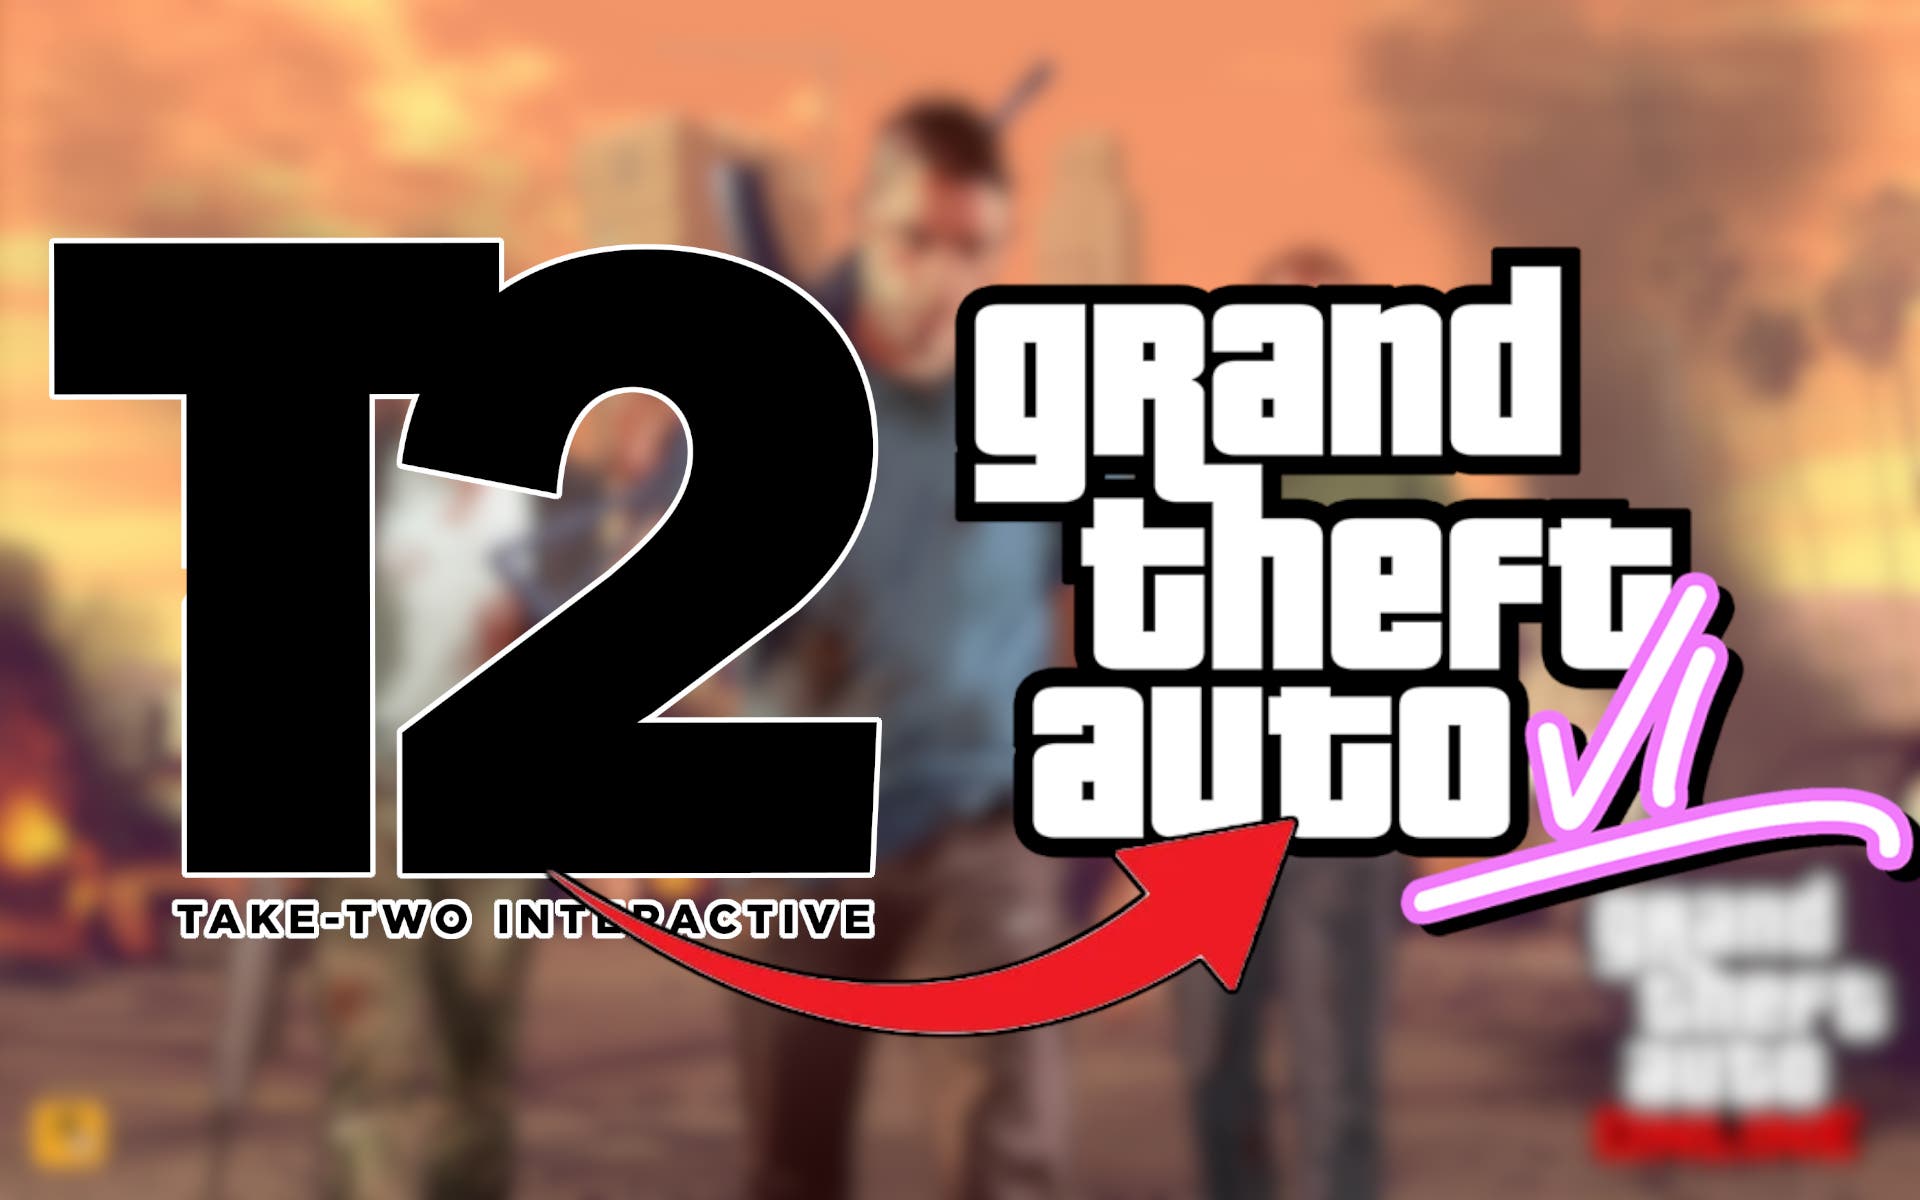 Take-Two announces another round of layoffs;  Will this affect GTA VI?